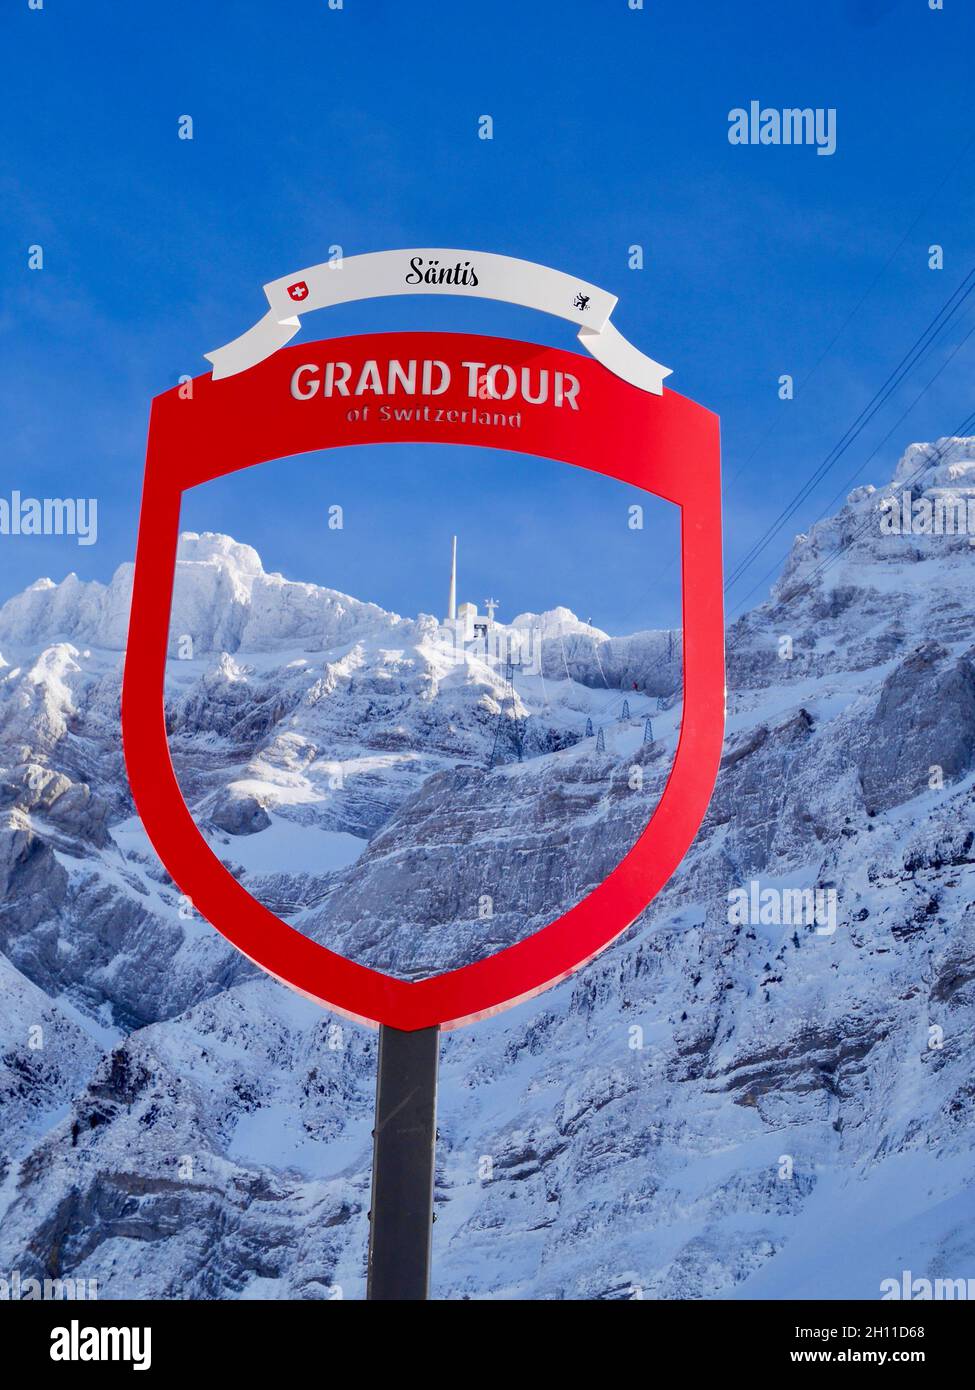 Mountain station of Saentis cable car seen through Grand Tour of Switzerland sign in winter. Appenzell, Switzerland. Stock Photo